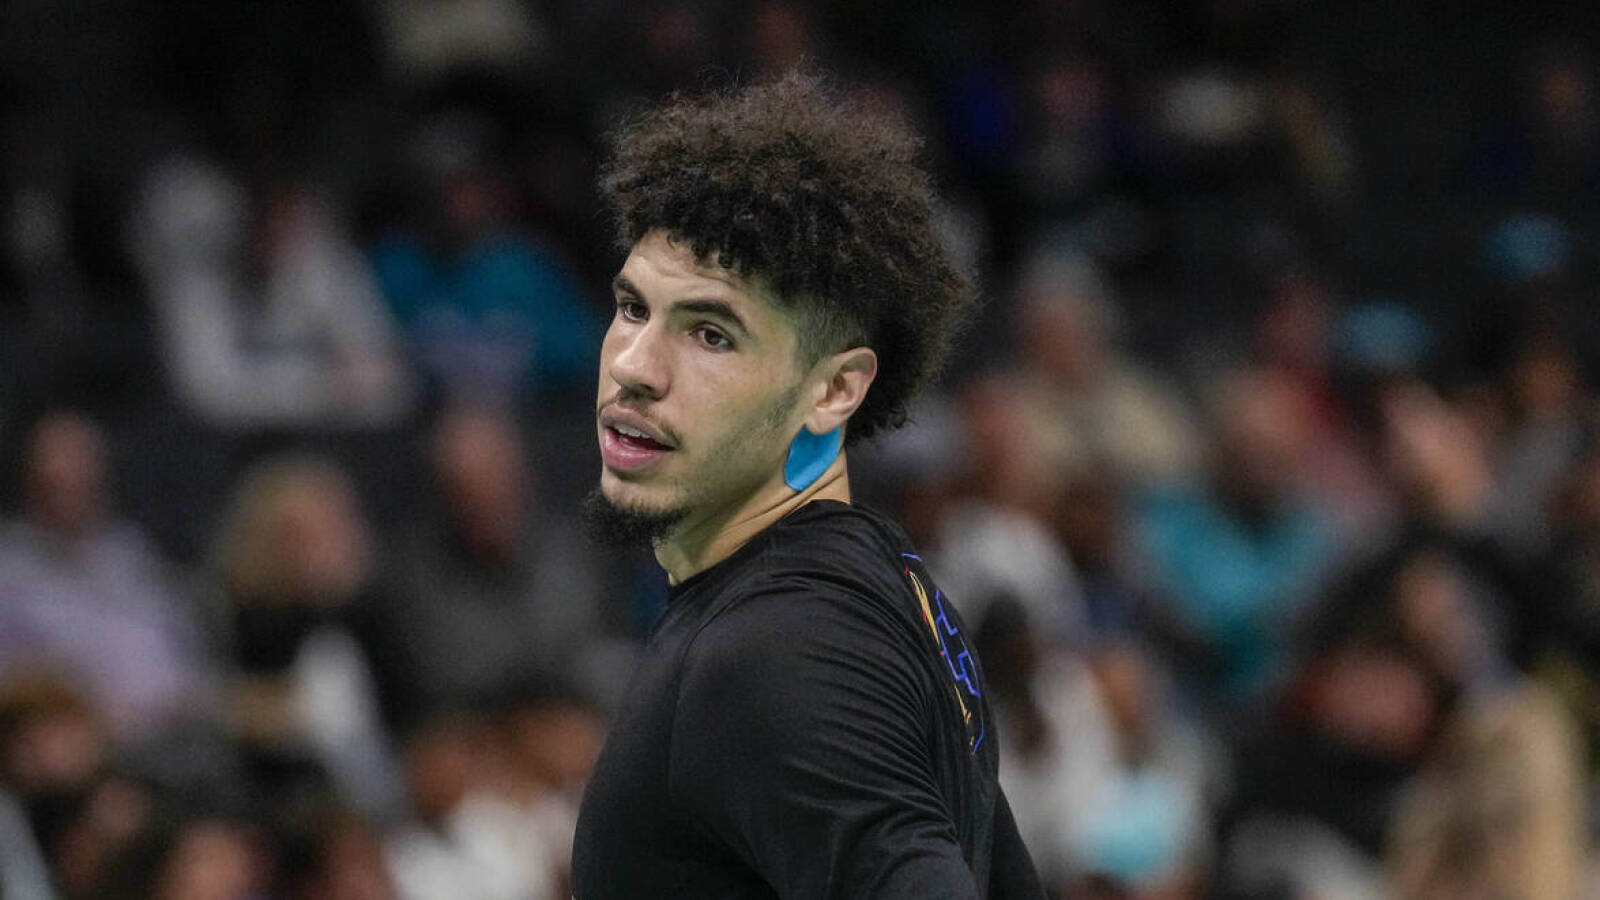 LaMelo Ball sued for allegedly hitting a fan with car